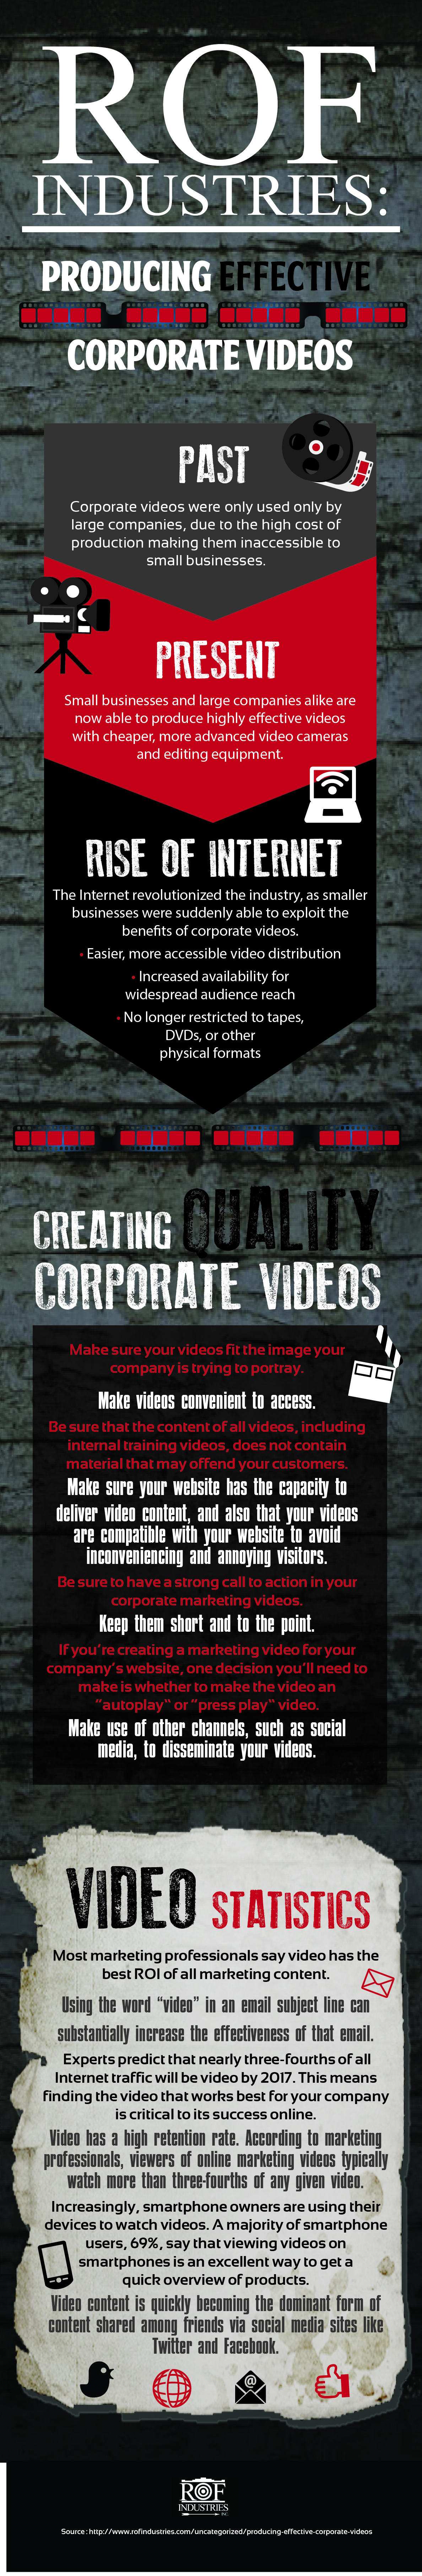 How to Produce an Effective Corporate Video